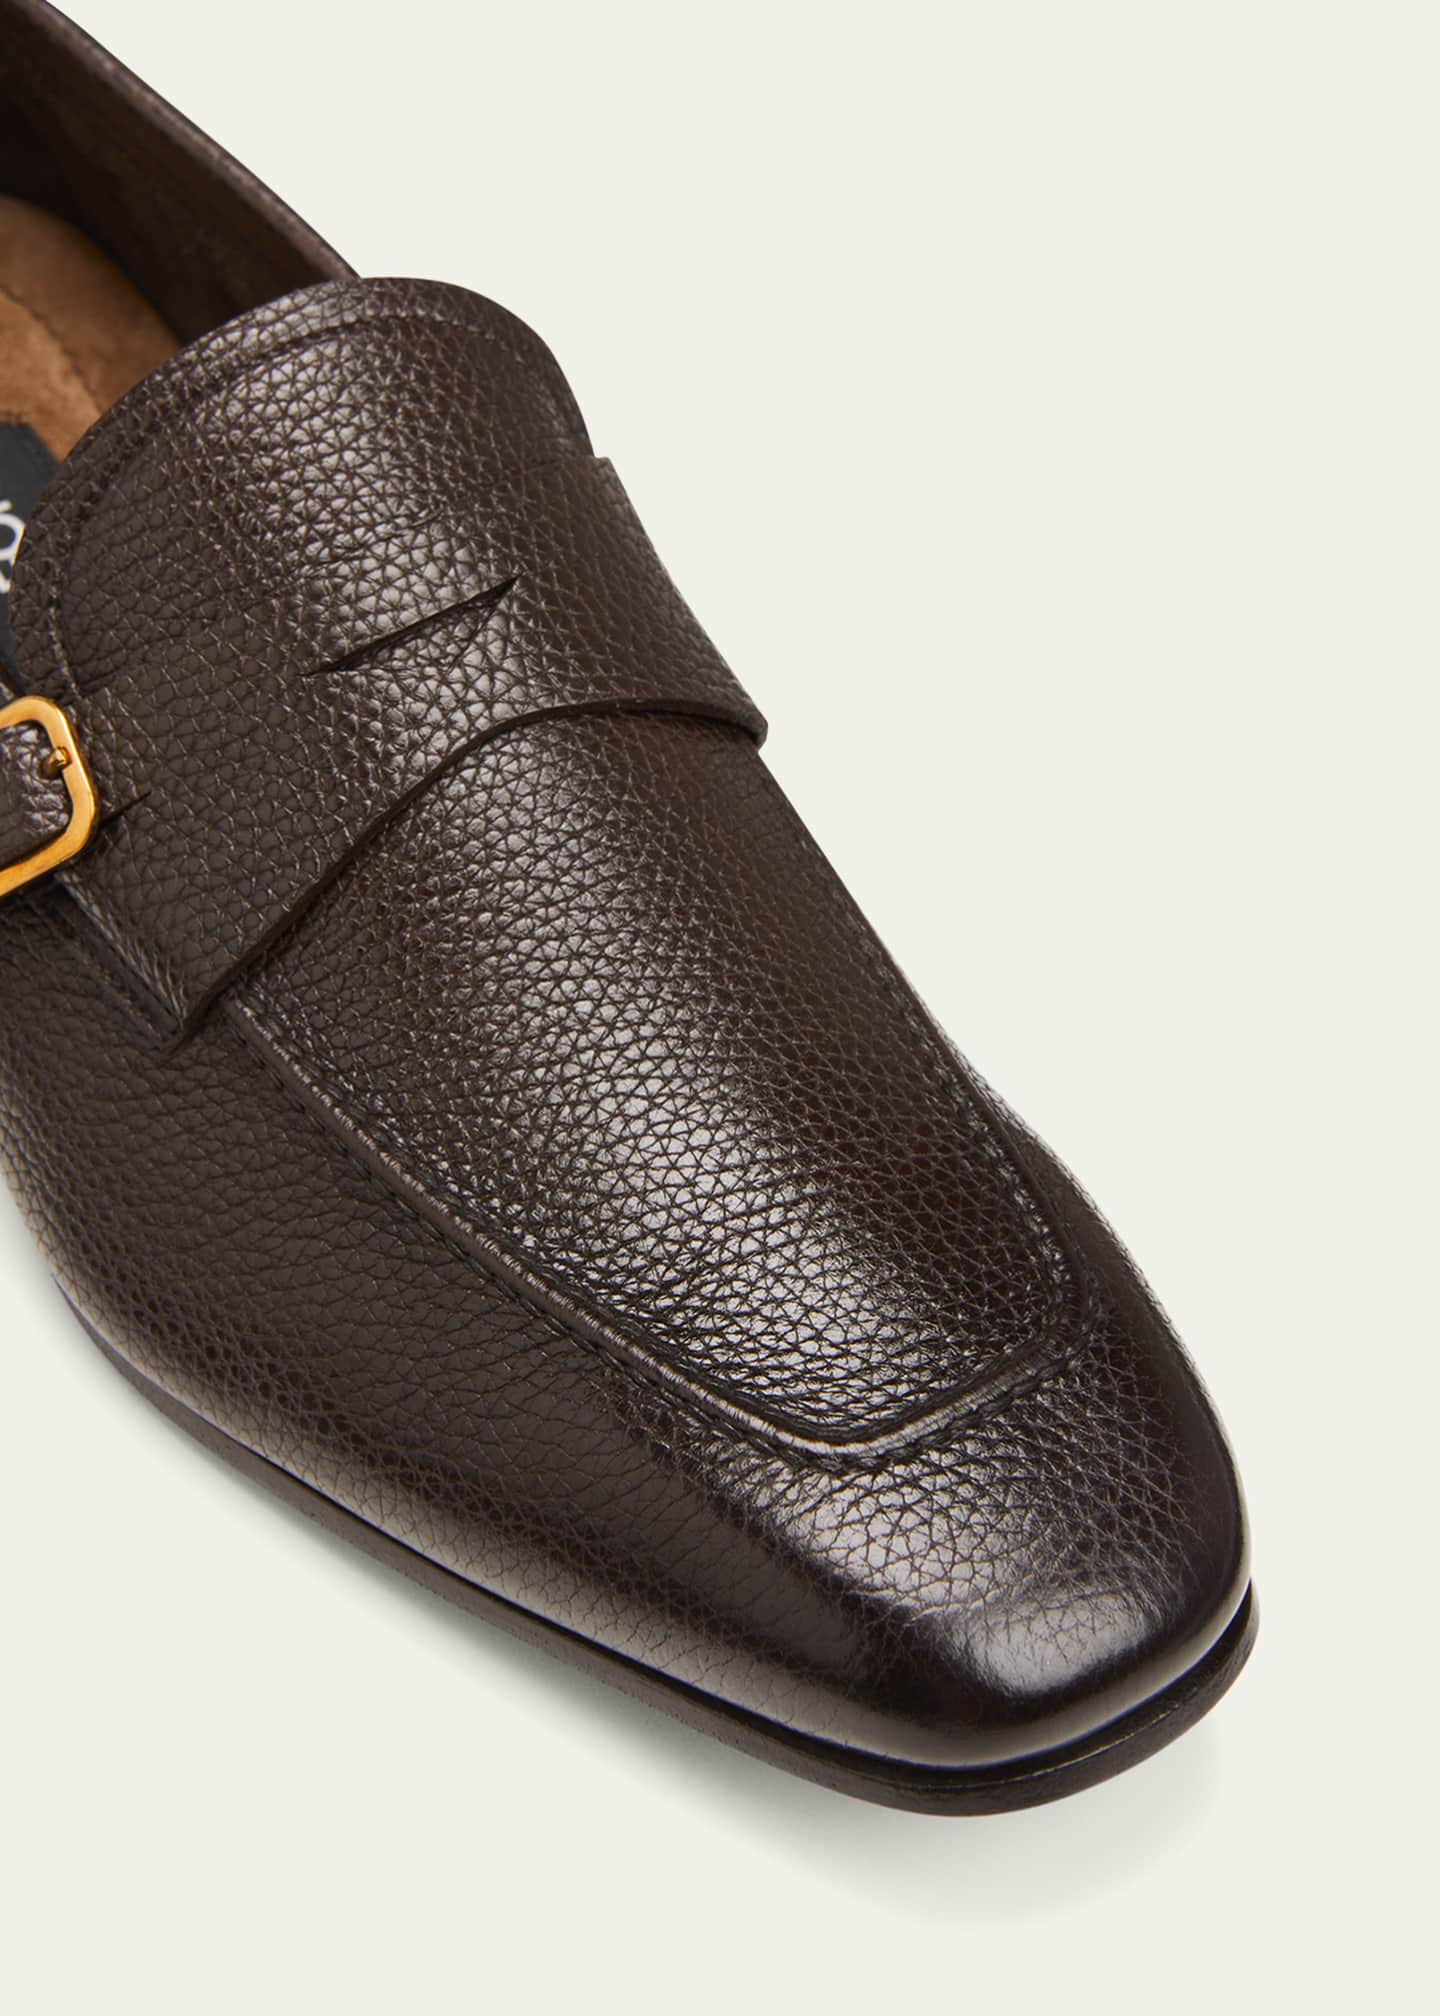 TOM FORD Men's Dover Leather Penny Loafers - Bergdorf Goodman